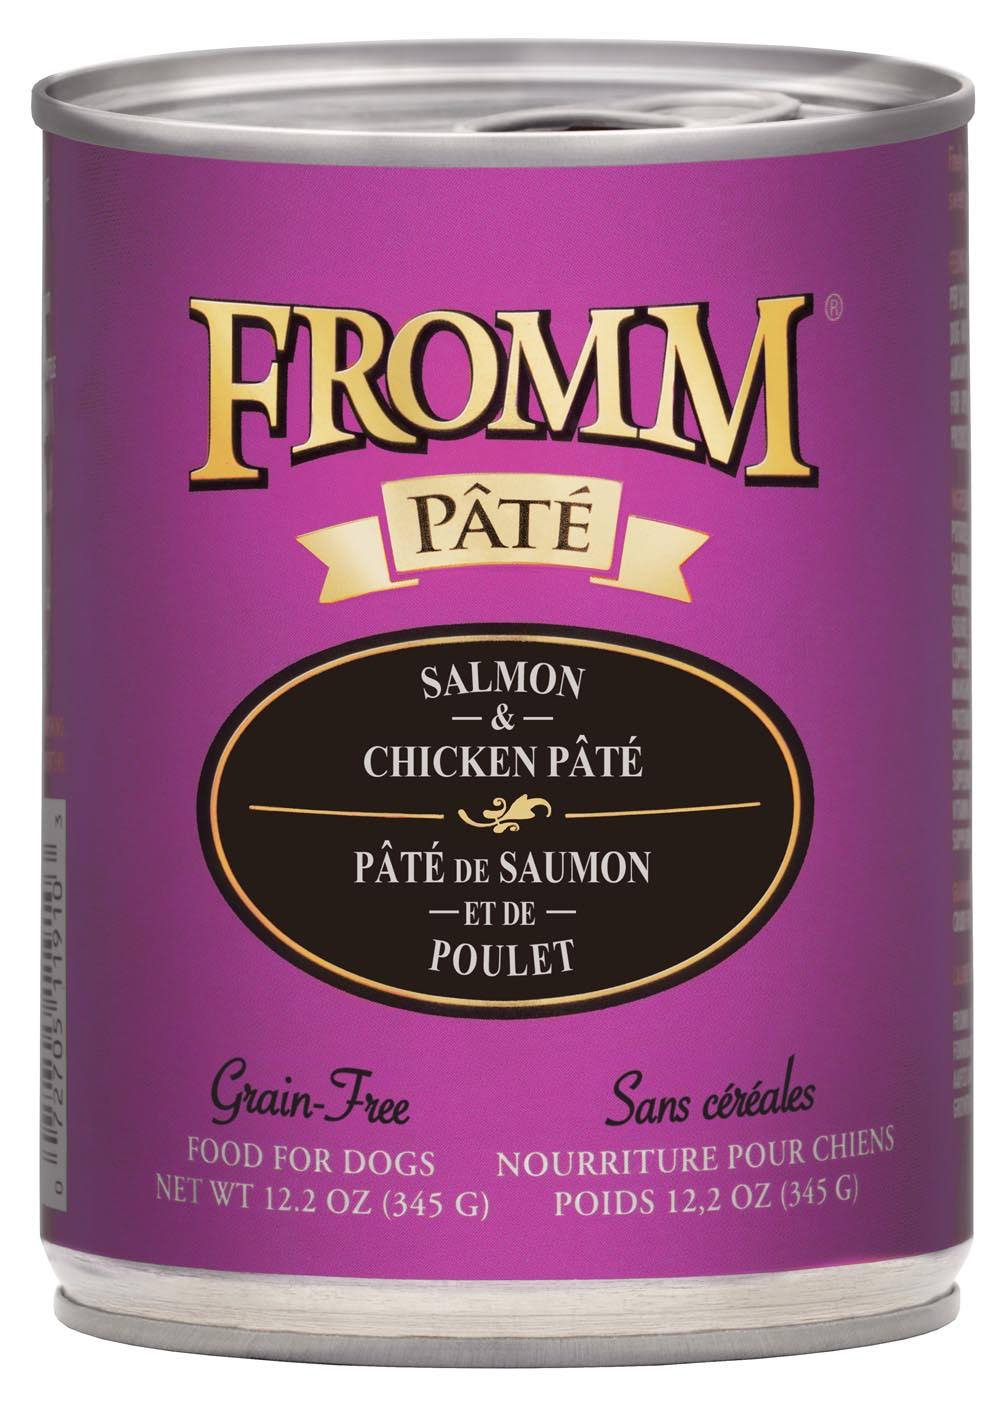 Fromm Gold Canned Dog Food 12.2Oz Salmon & Chicken Pate